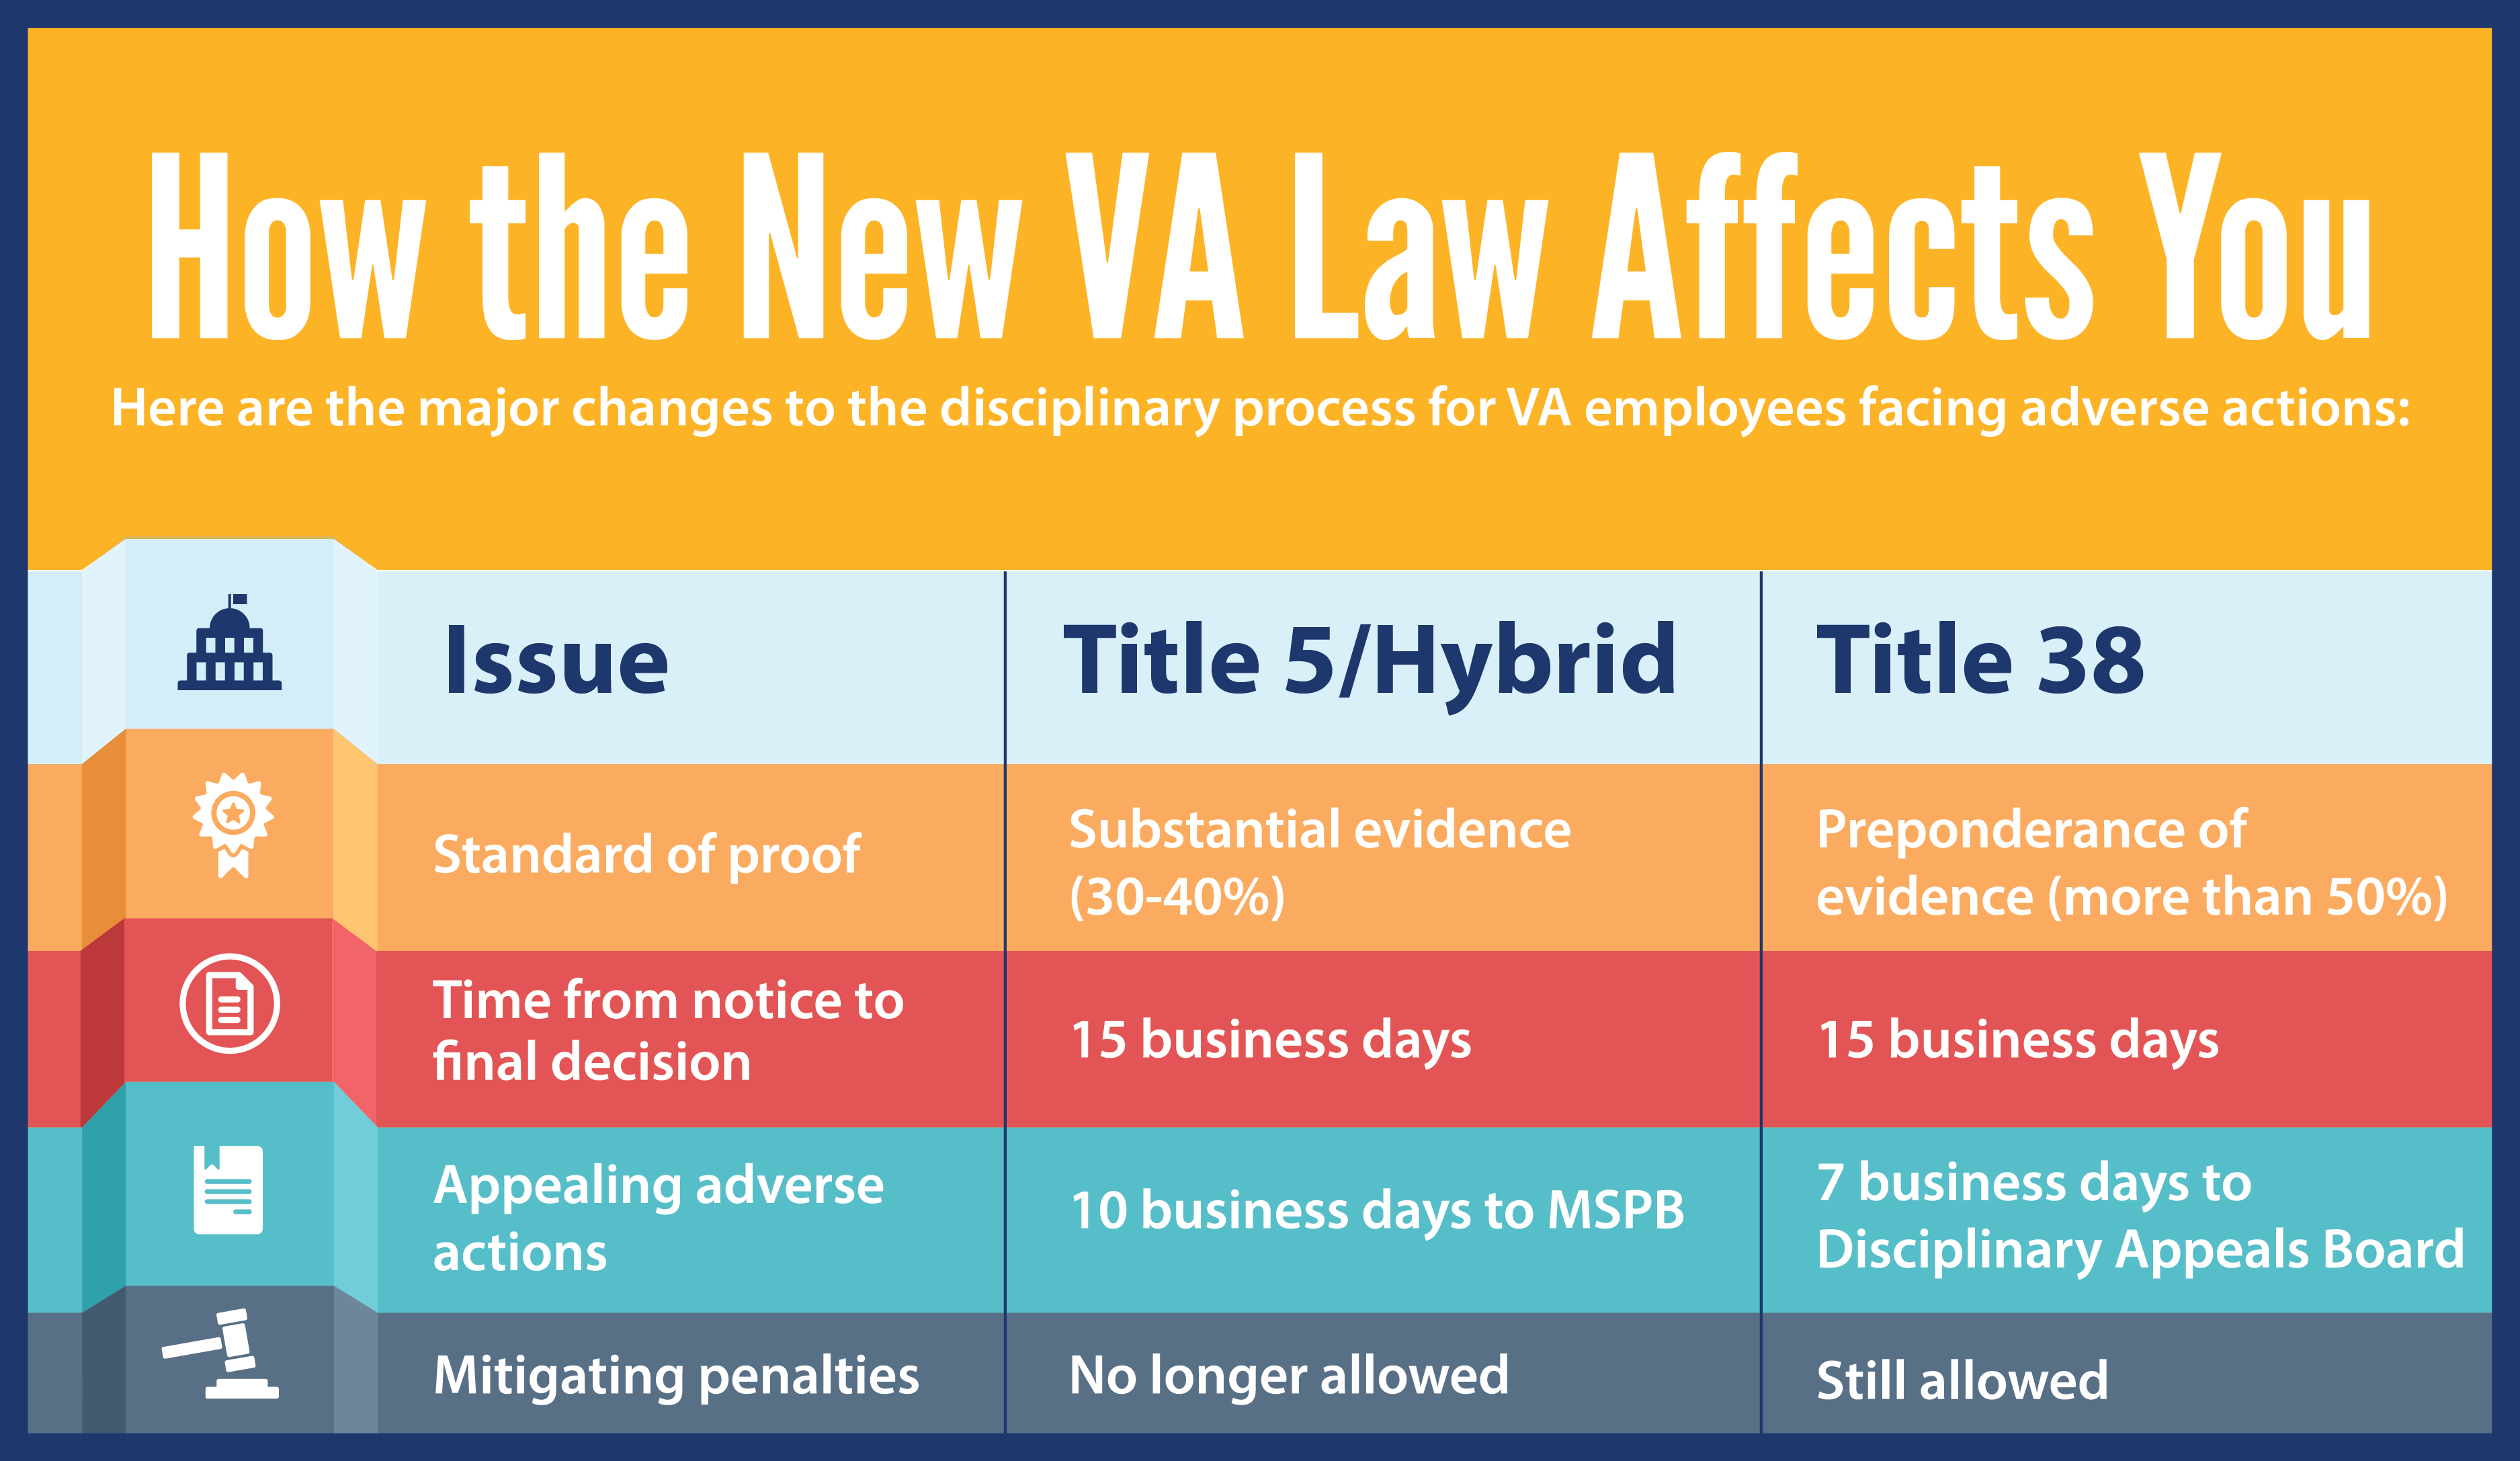 How the New VA Law Affects You